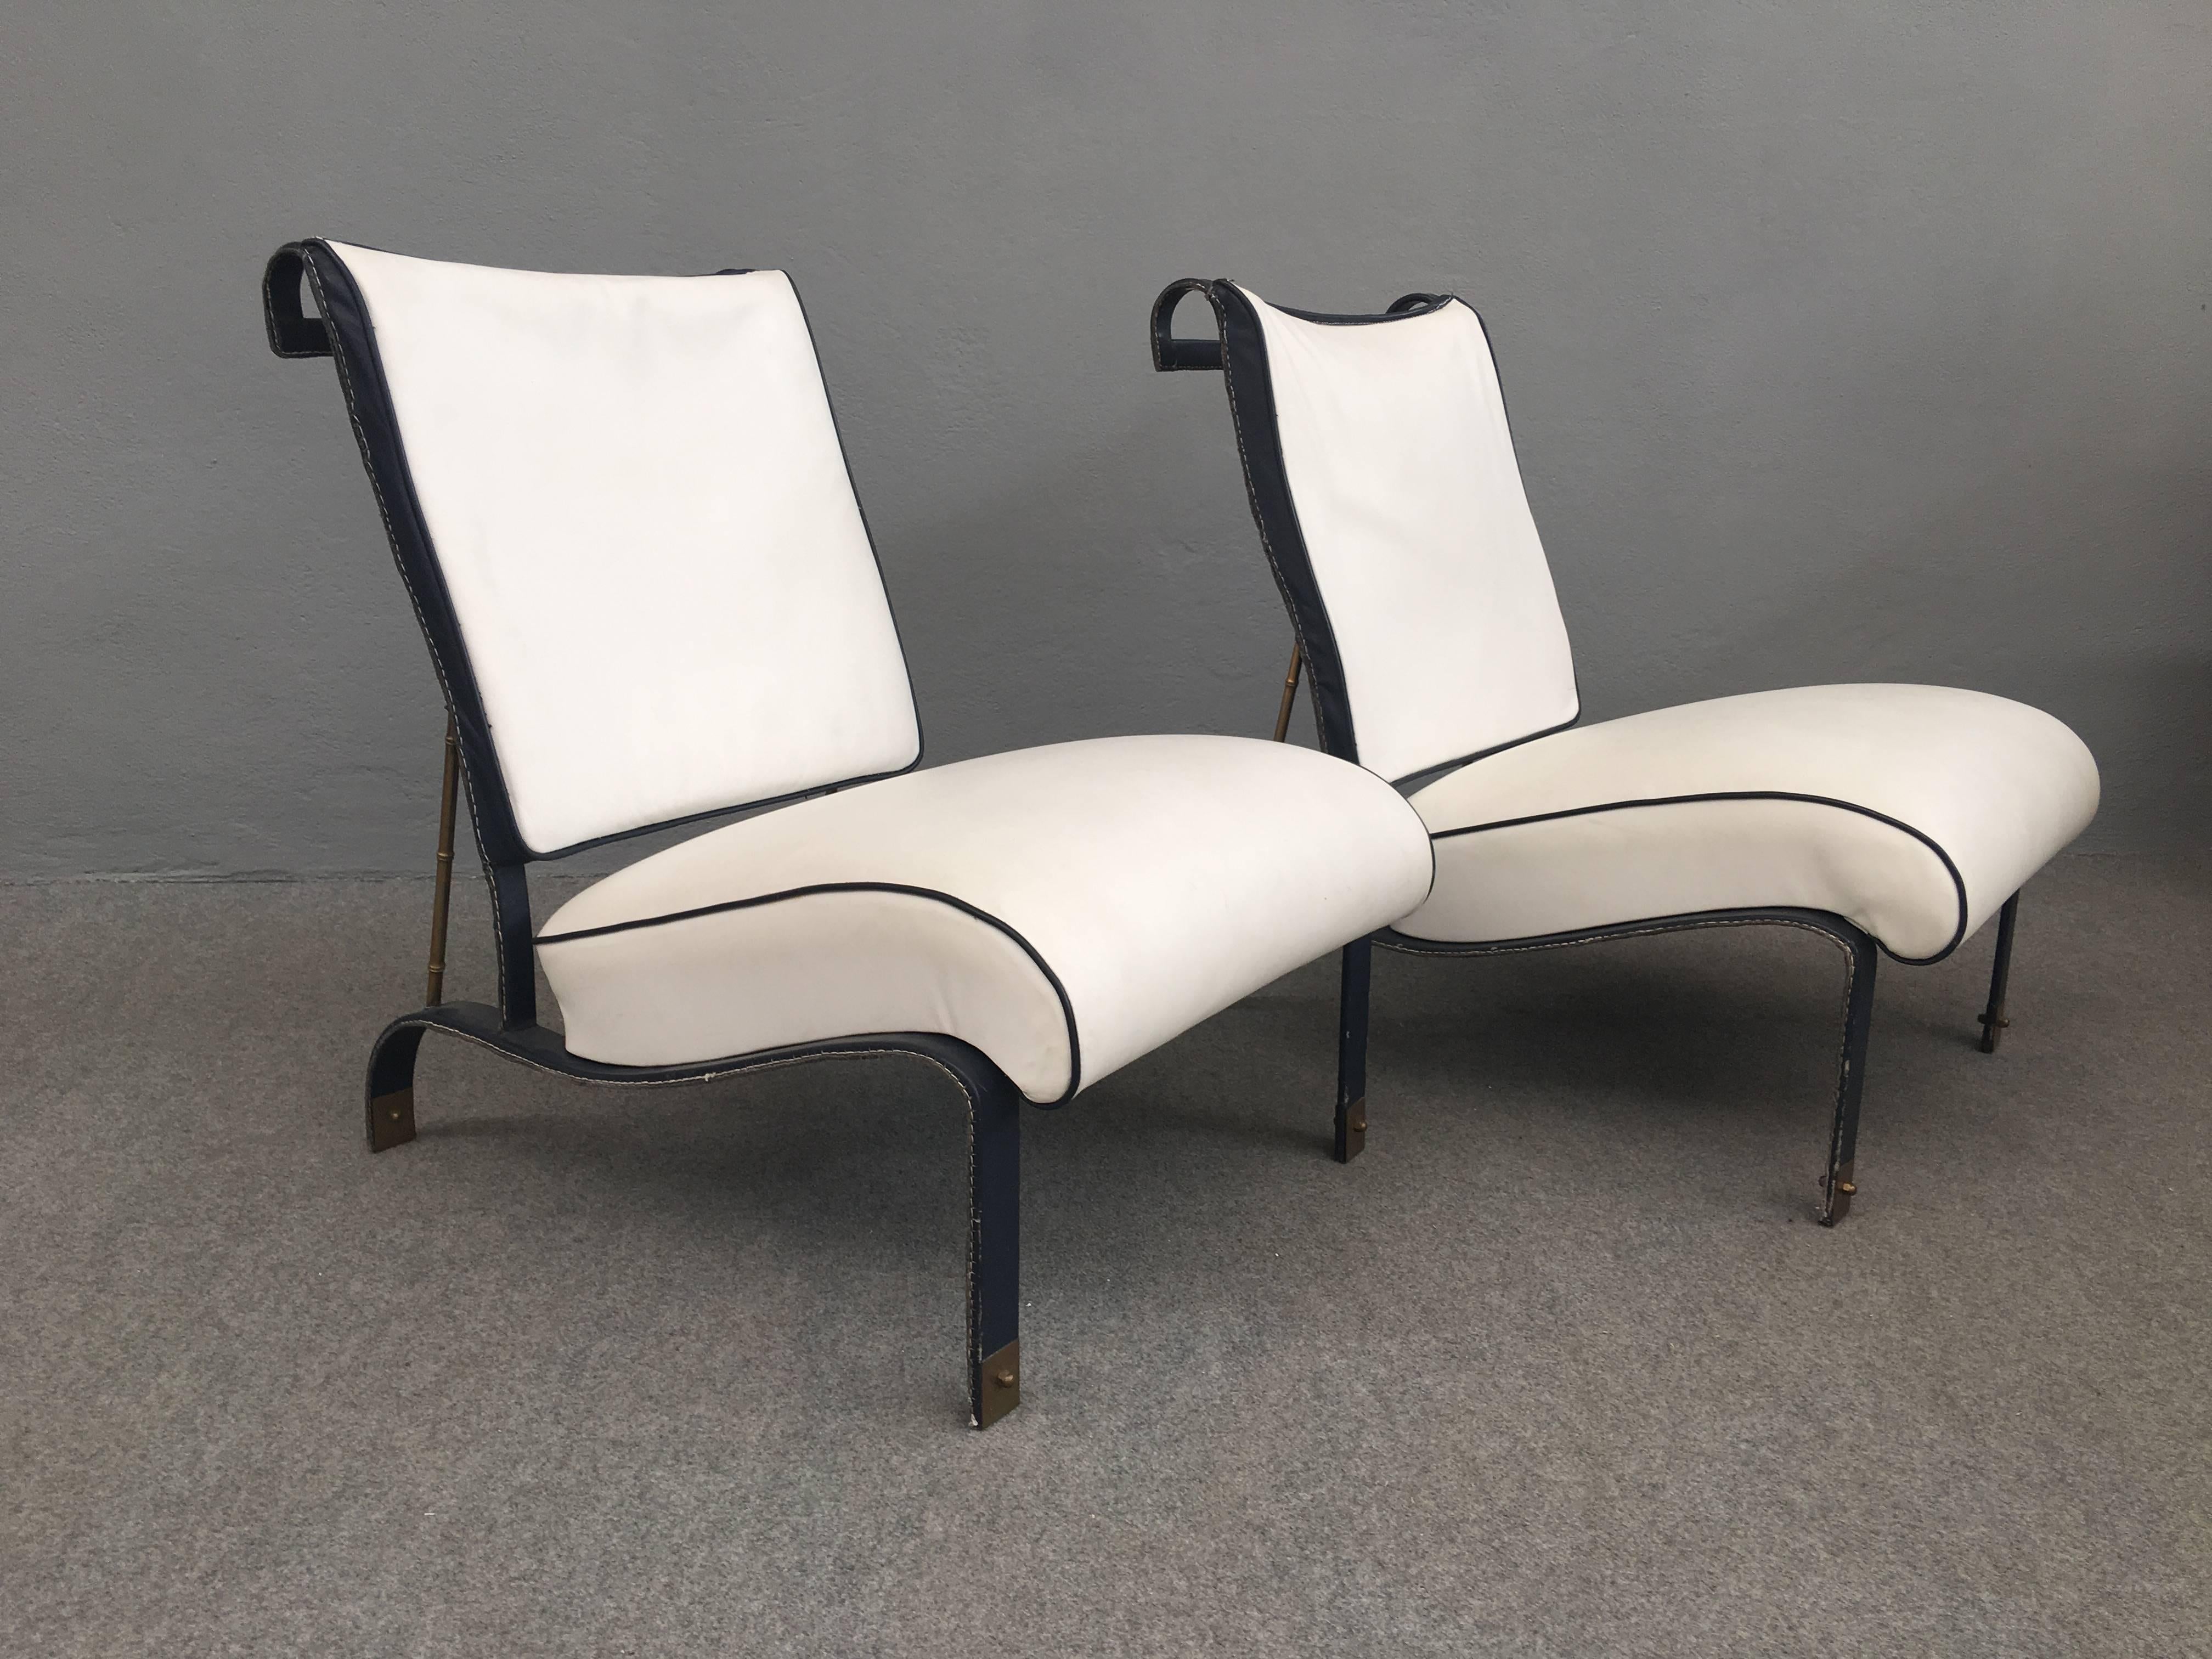 Rare pair of leather, metal and brass armchairs attributed to Jacques Adnet.
Provenance: Hermes store in Paris.